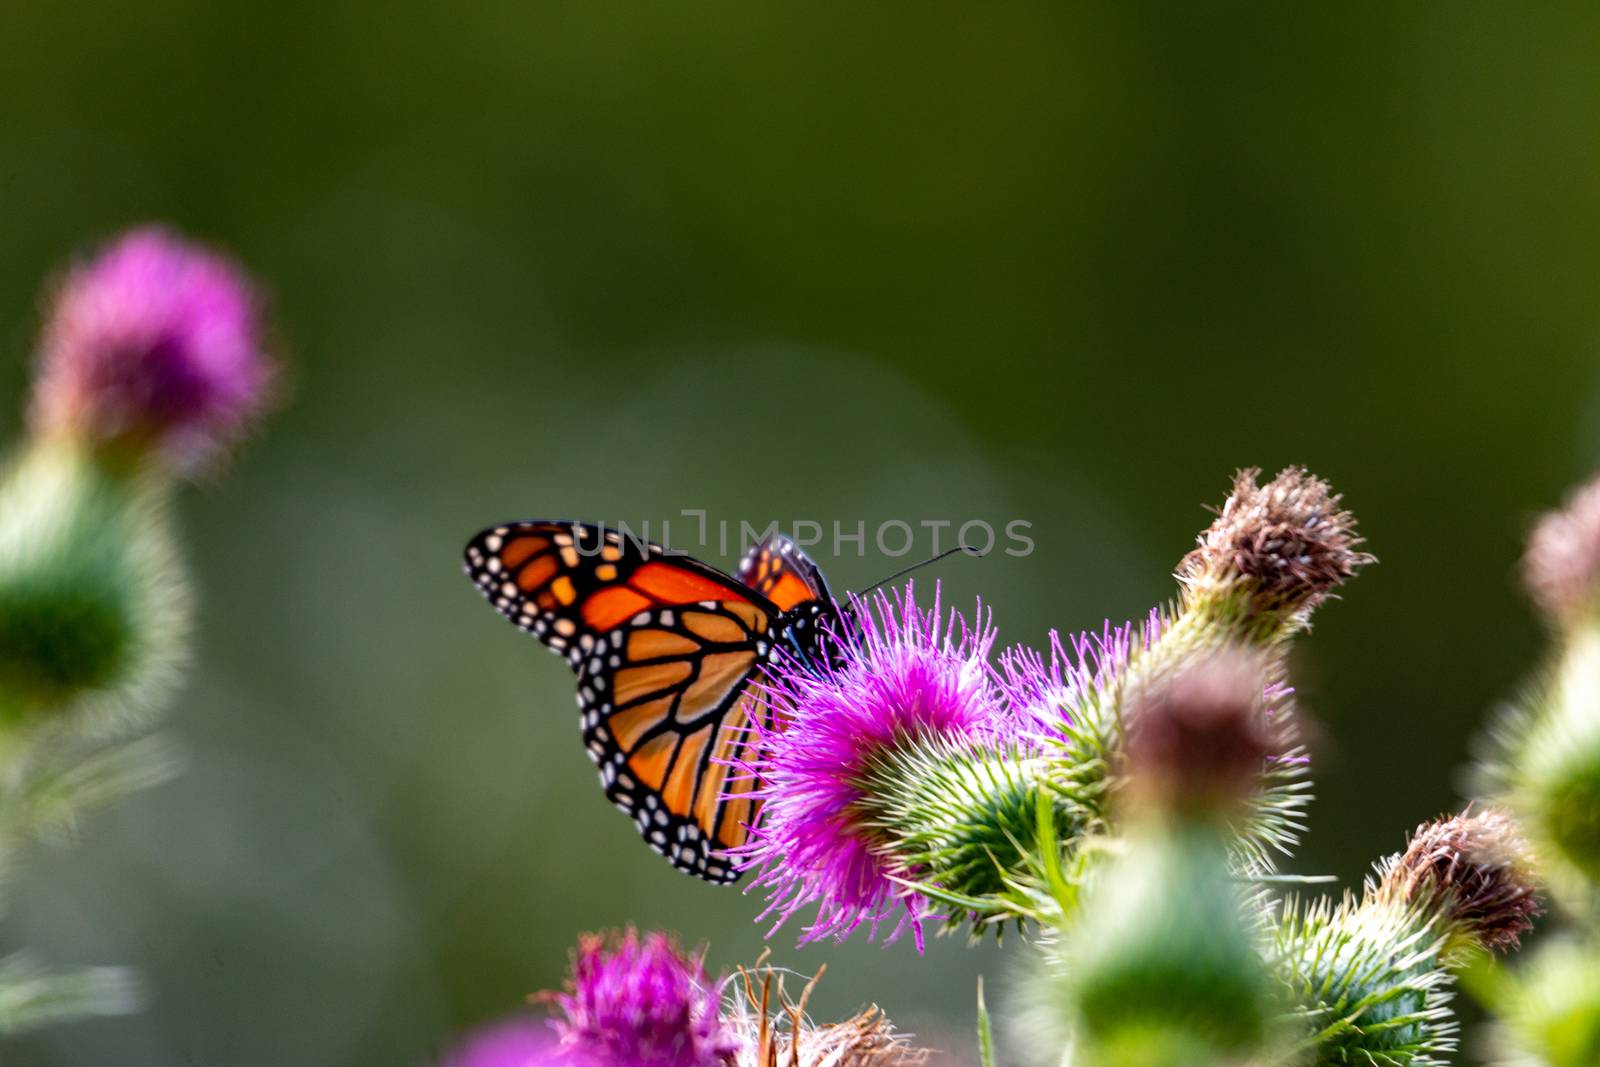 Monarch on Thistle. A large monarch butterfly on purple thistle